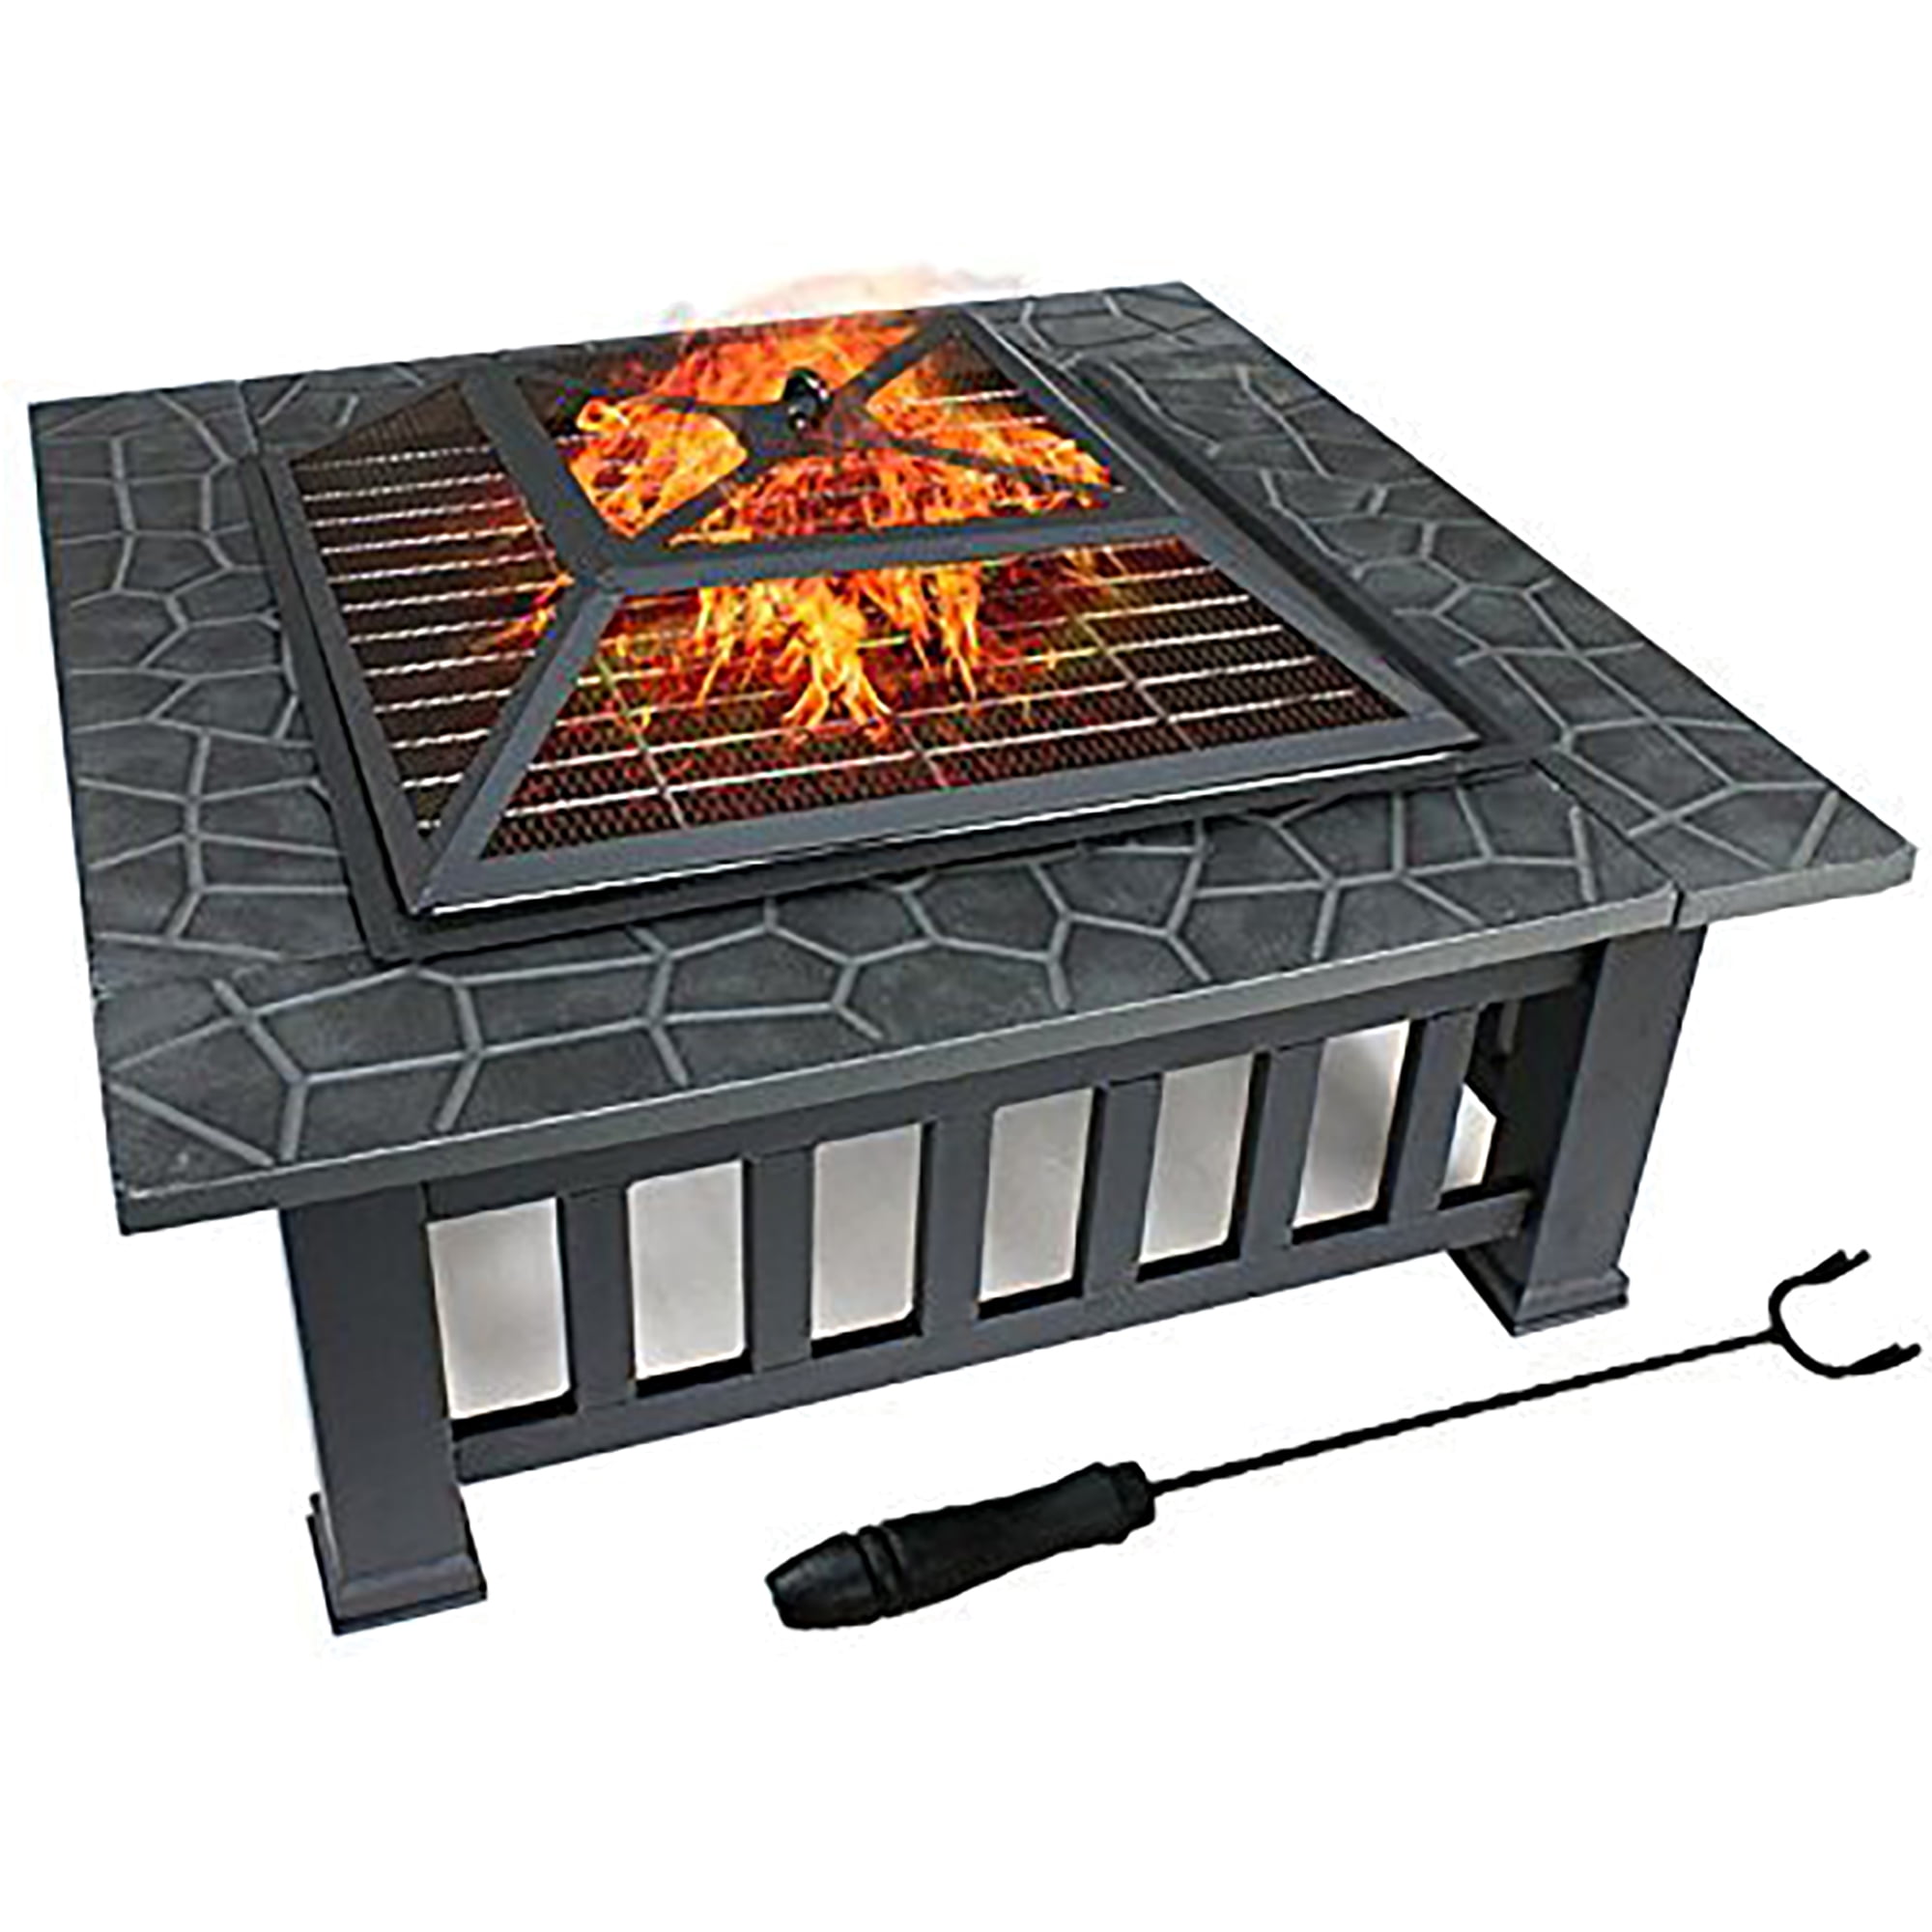 32 Zeny Outdoor Fire Pit Square Metal, Long Lasting Fire Pit